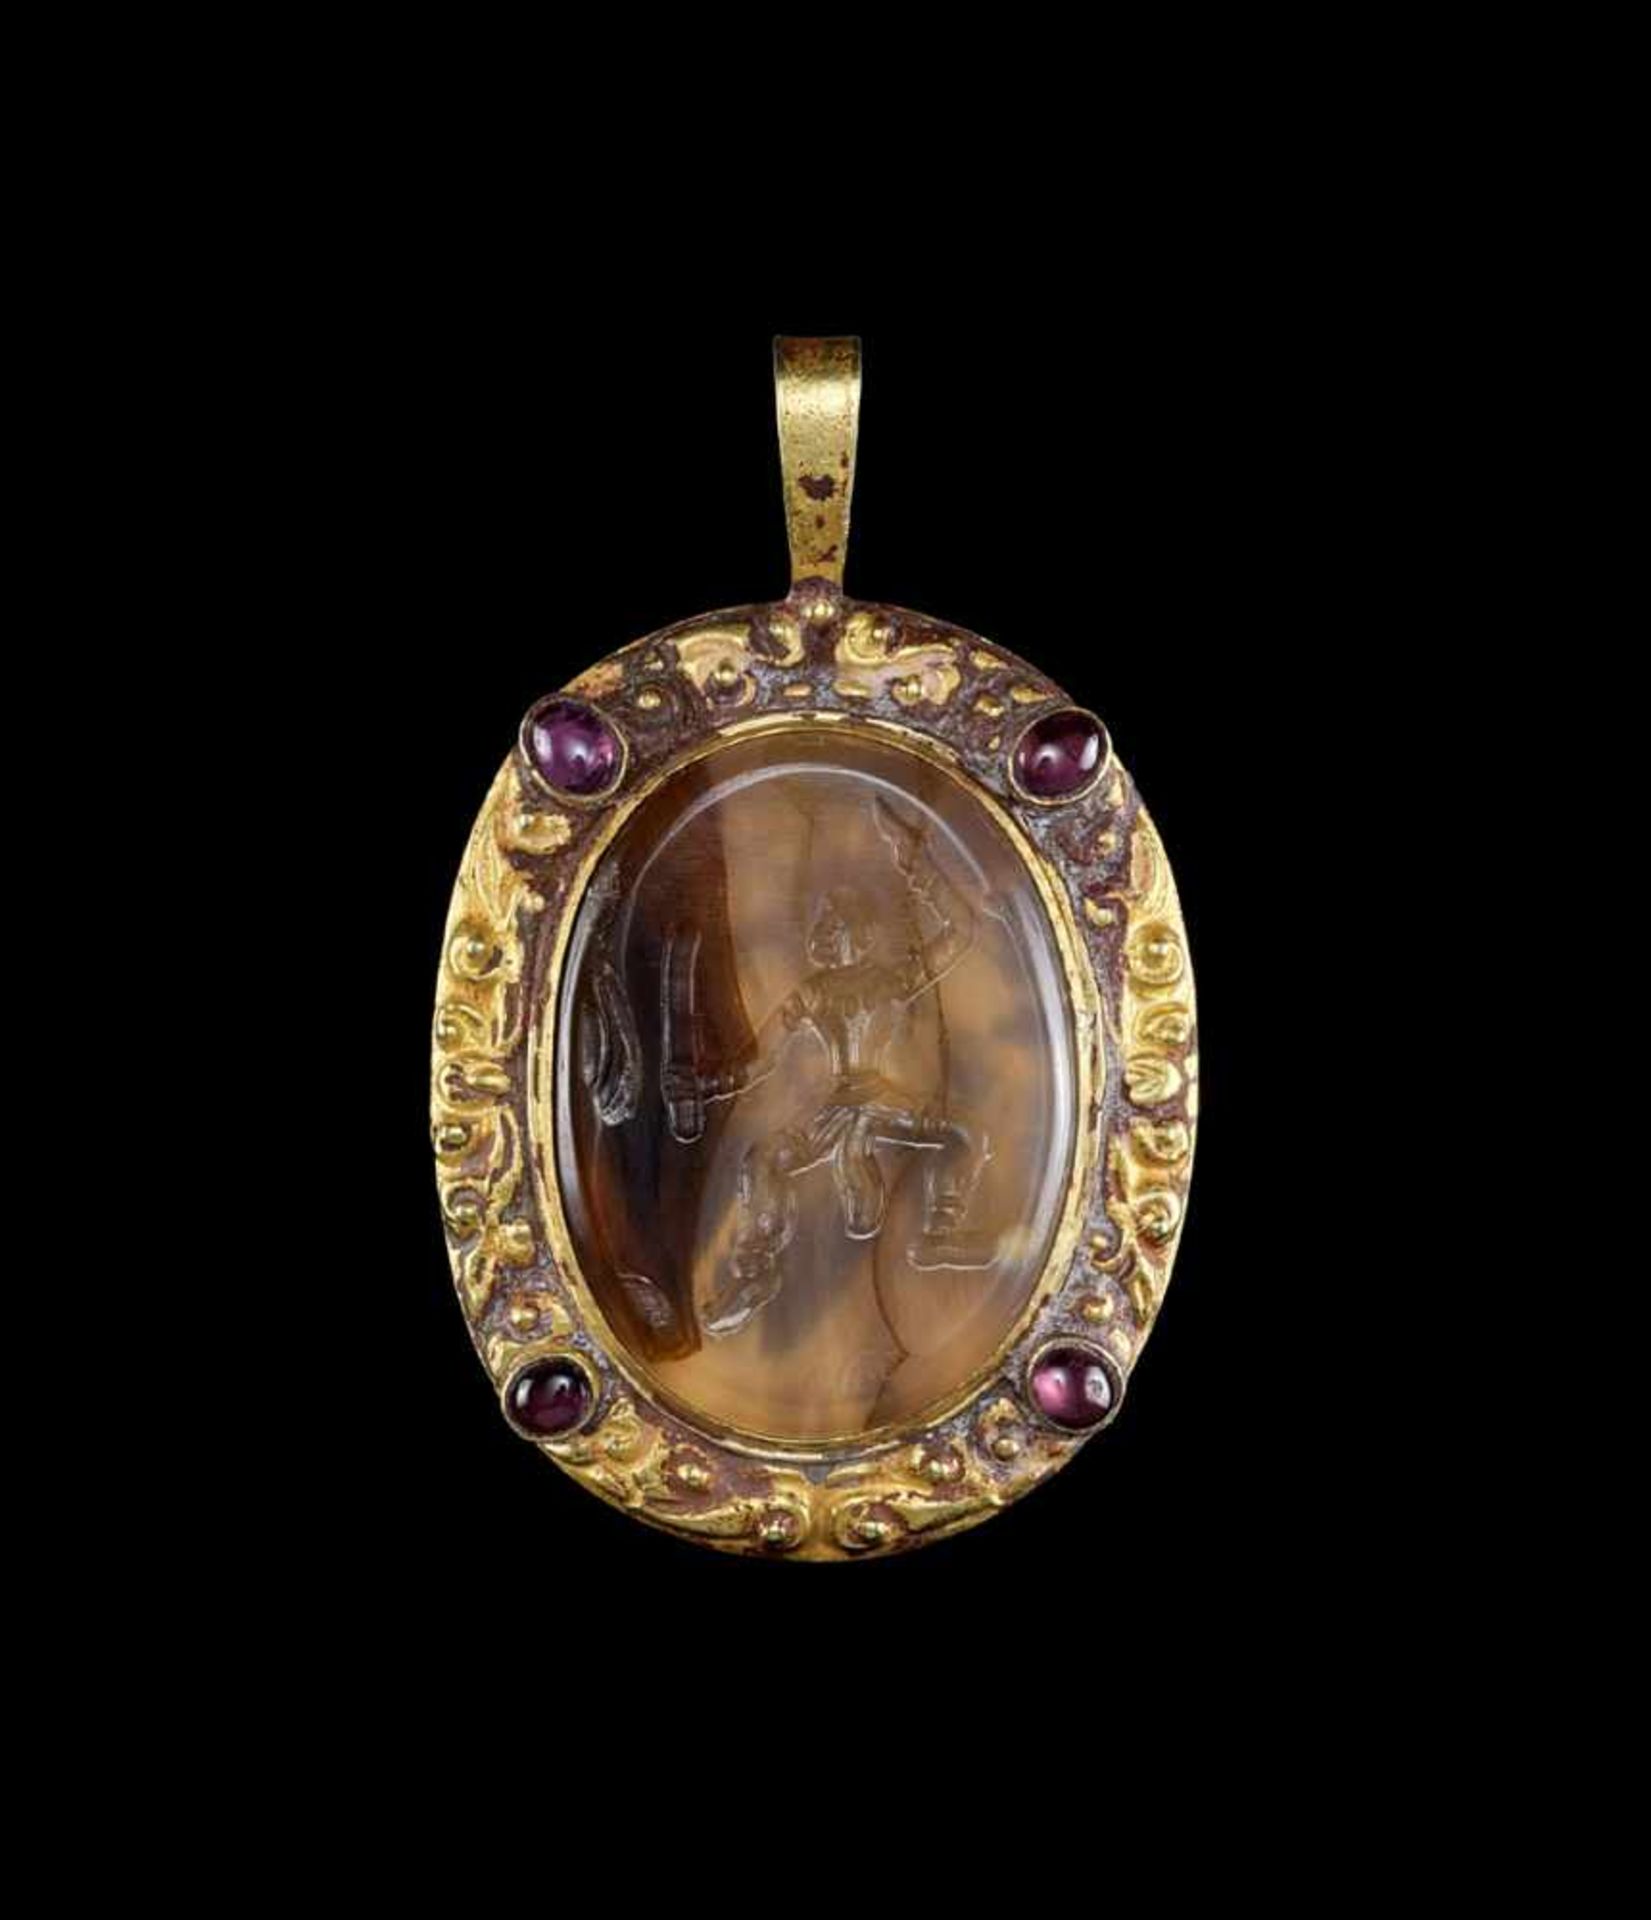 A CHAM GOLD PENDANT WITH STONE INTAGLIO DEPICTING SHIVA Central Cham kingdom, early classical - Image 3 of 5